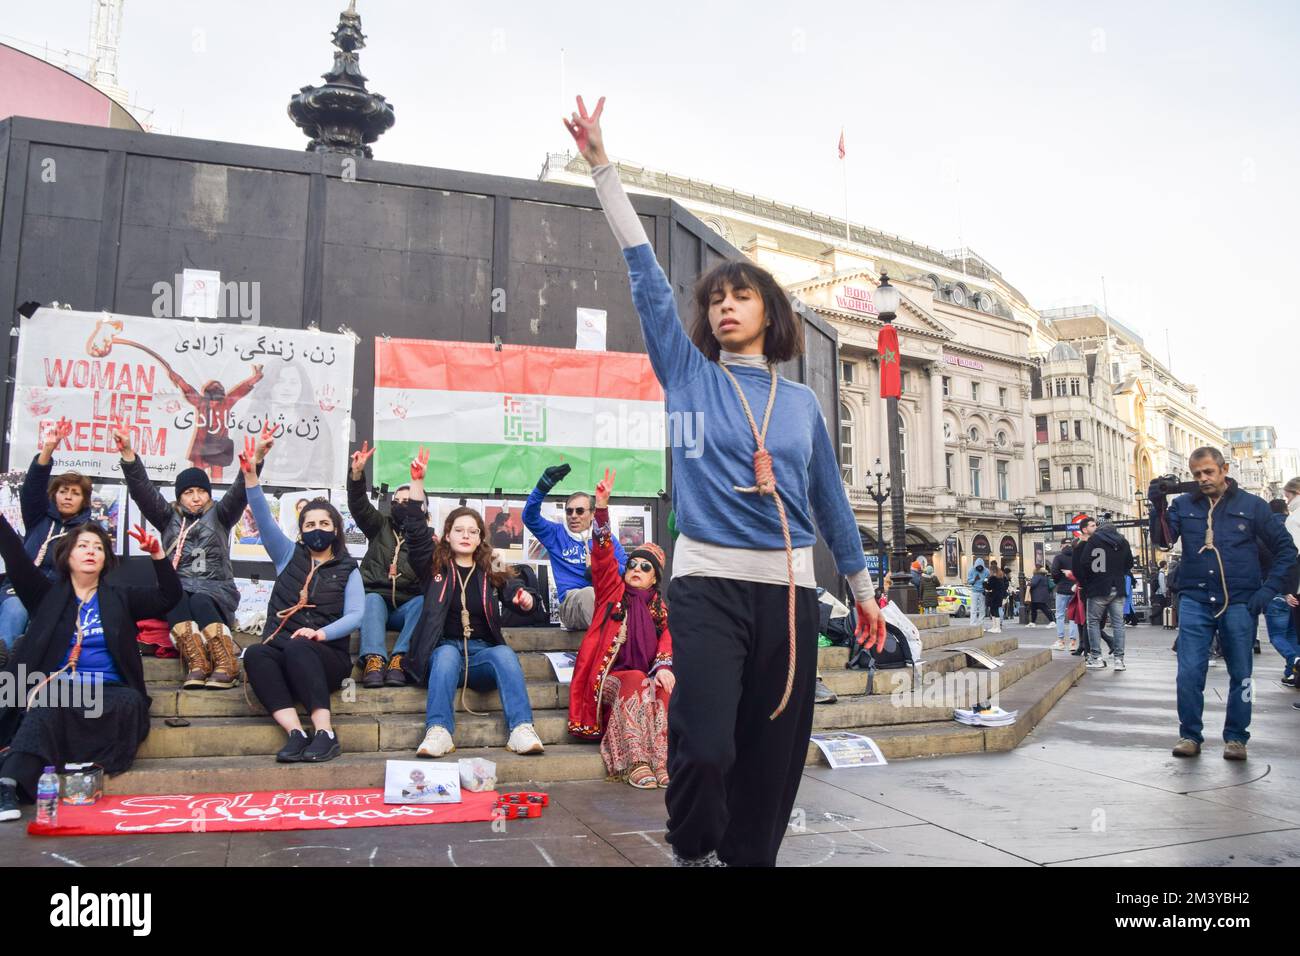 London, UK. 17th December 2022. A protester performs a dance with a noose around her neck. A group of women staged a demonstration and performance in Piccadilly Circus in protest against the reported executions of anti-government protesters in Iran. The activists tied ropes around their necks and covered their hands in fake blood. Credit: Vuk Valcic/Alamy Live News Stock Photo